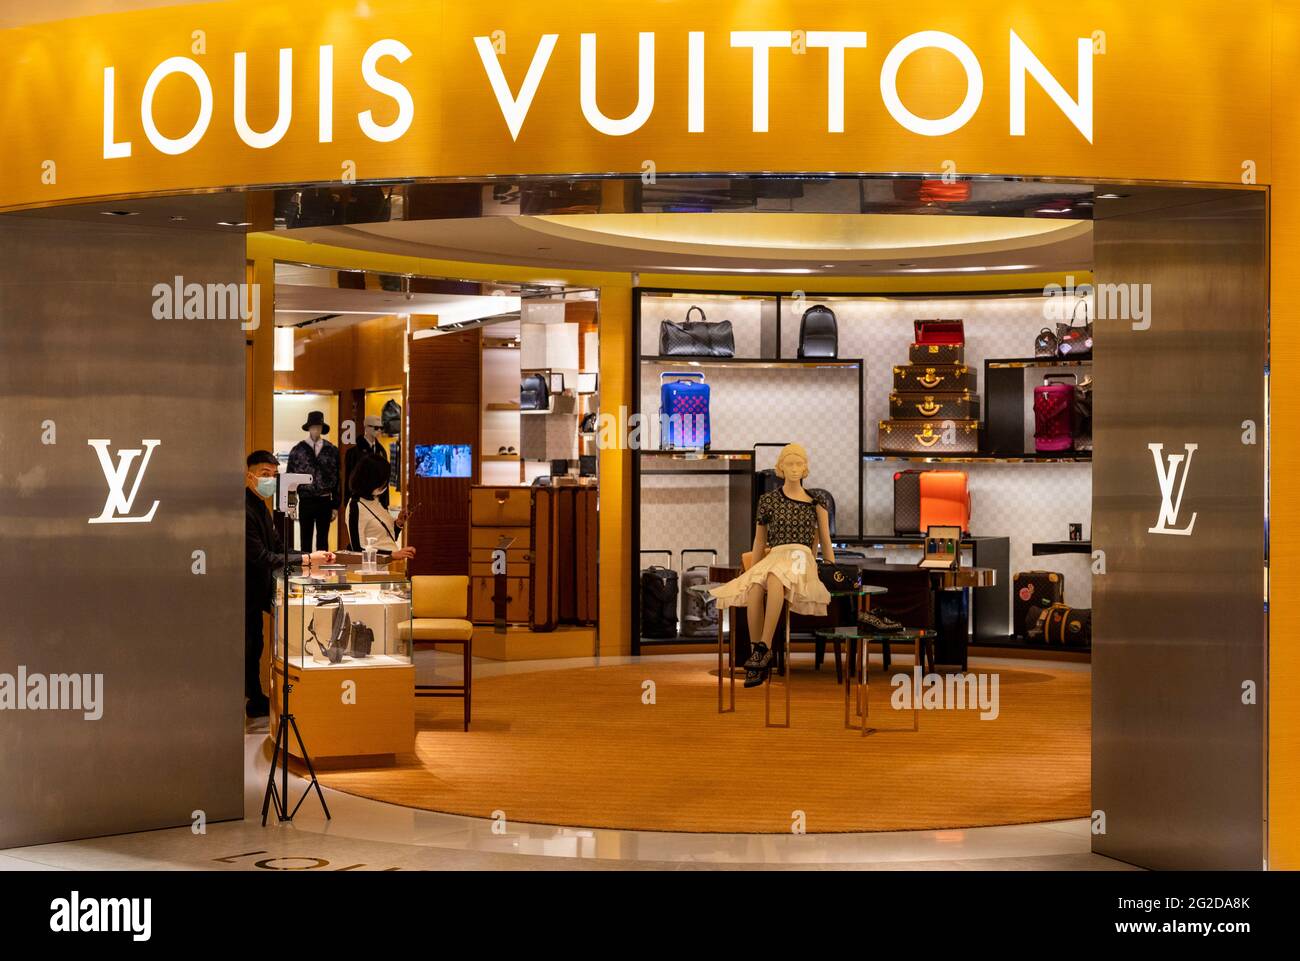 Louis Vuitton Outlet at Night, Shanghai, China Editorial Stock Image -  Image of ceiling, mall: 89801839